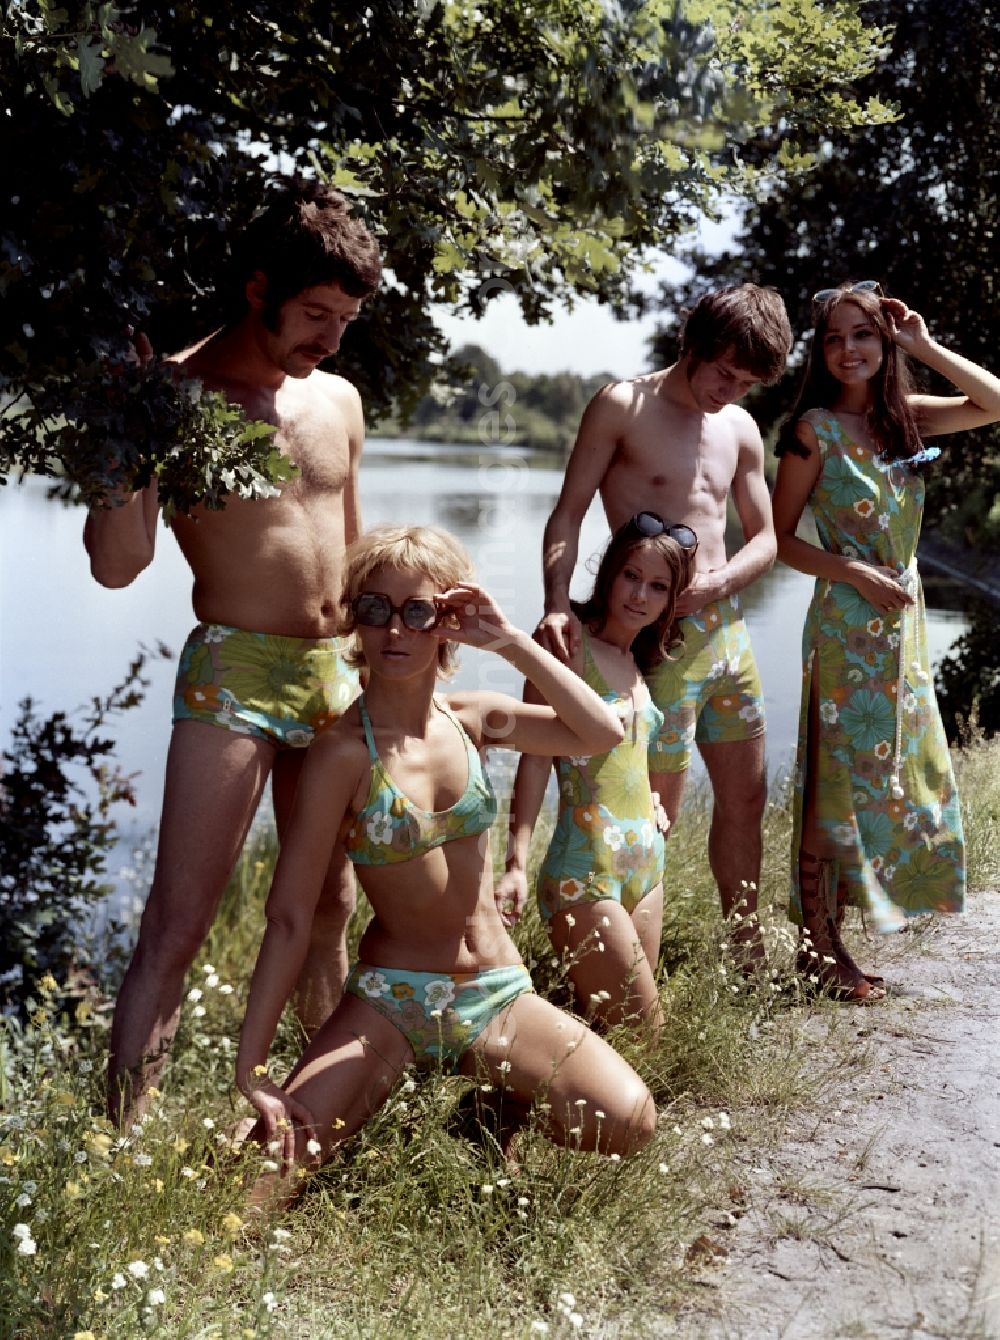 GDR photo archive: Pirna - Young people present the latest summer swimwear in Pirna in the state Saxony on the territory of the former GDR, German Democratic Republic